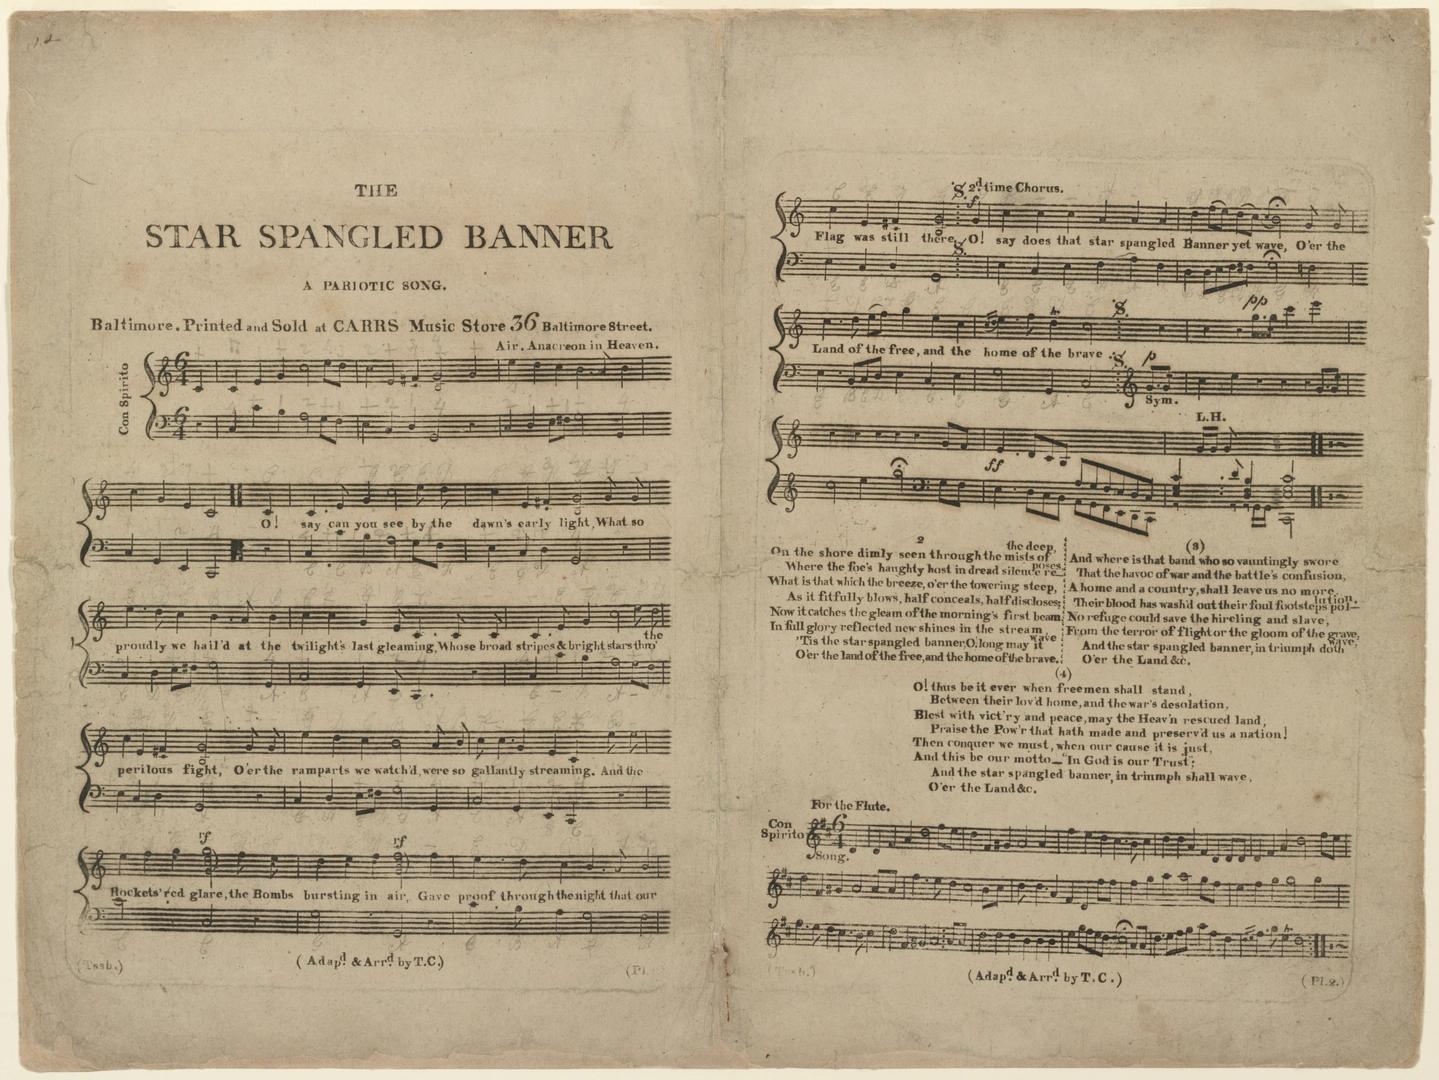 By Thomas Carr (arranger) - C[arr], T[homas] (arr.) (1814) The Star Spangled Banner: a Pariotic Song, Baltimore: Carrs Music Store, Public Domain, https://commons.wikimedia.org/w/index.php?curid=91894505